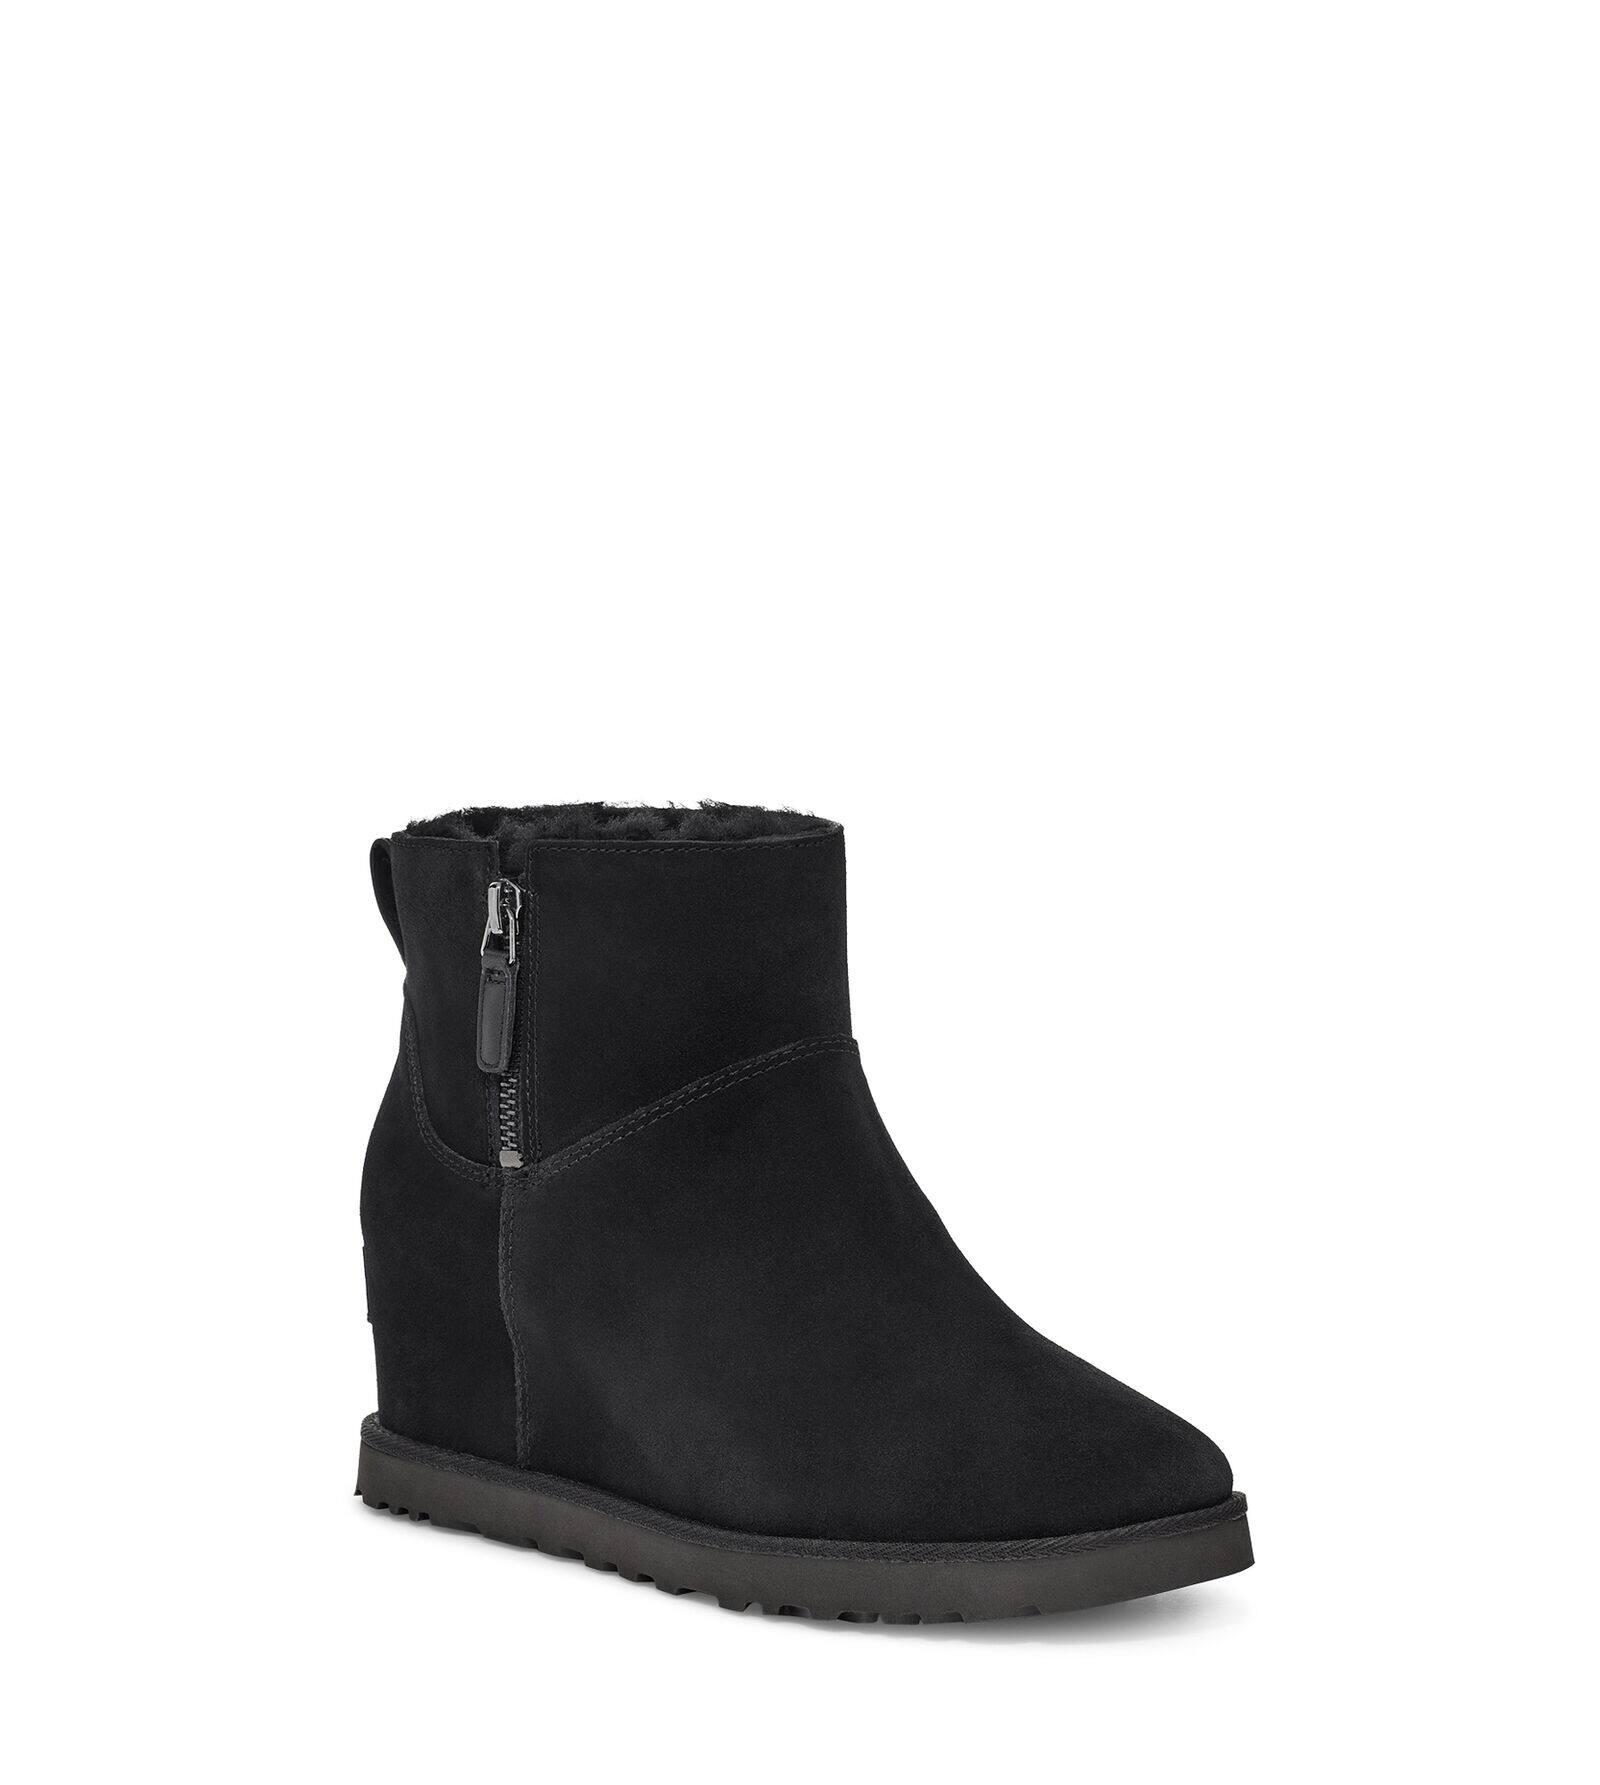 UGG Classic Femme Mini Suede Wedge Boots in Black - Save 85% - Lyst